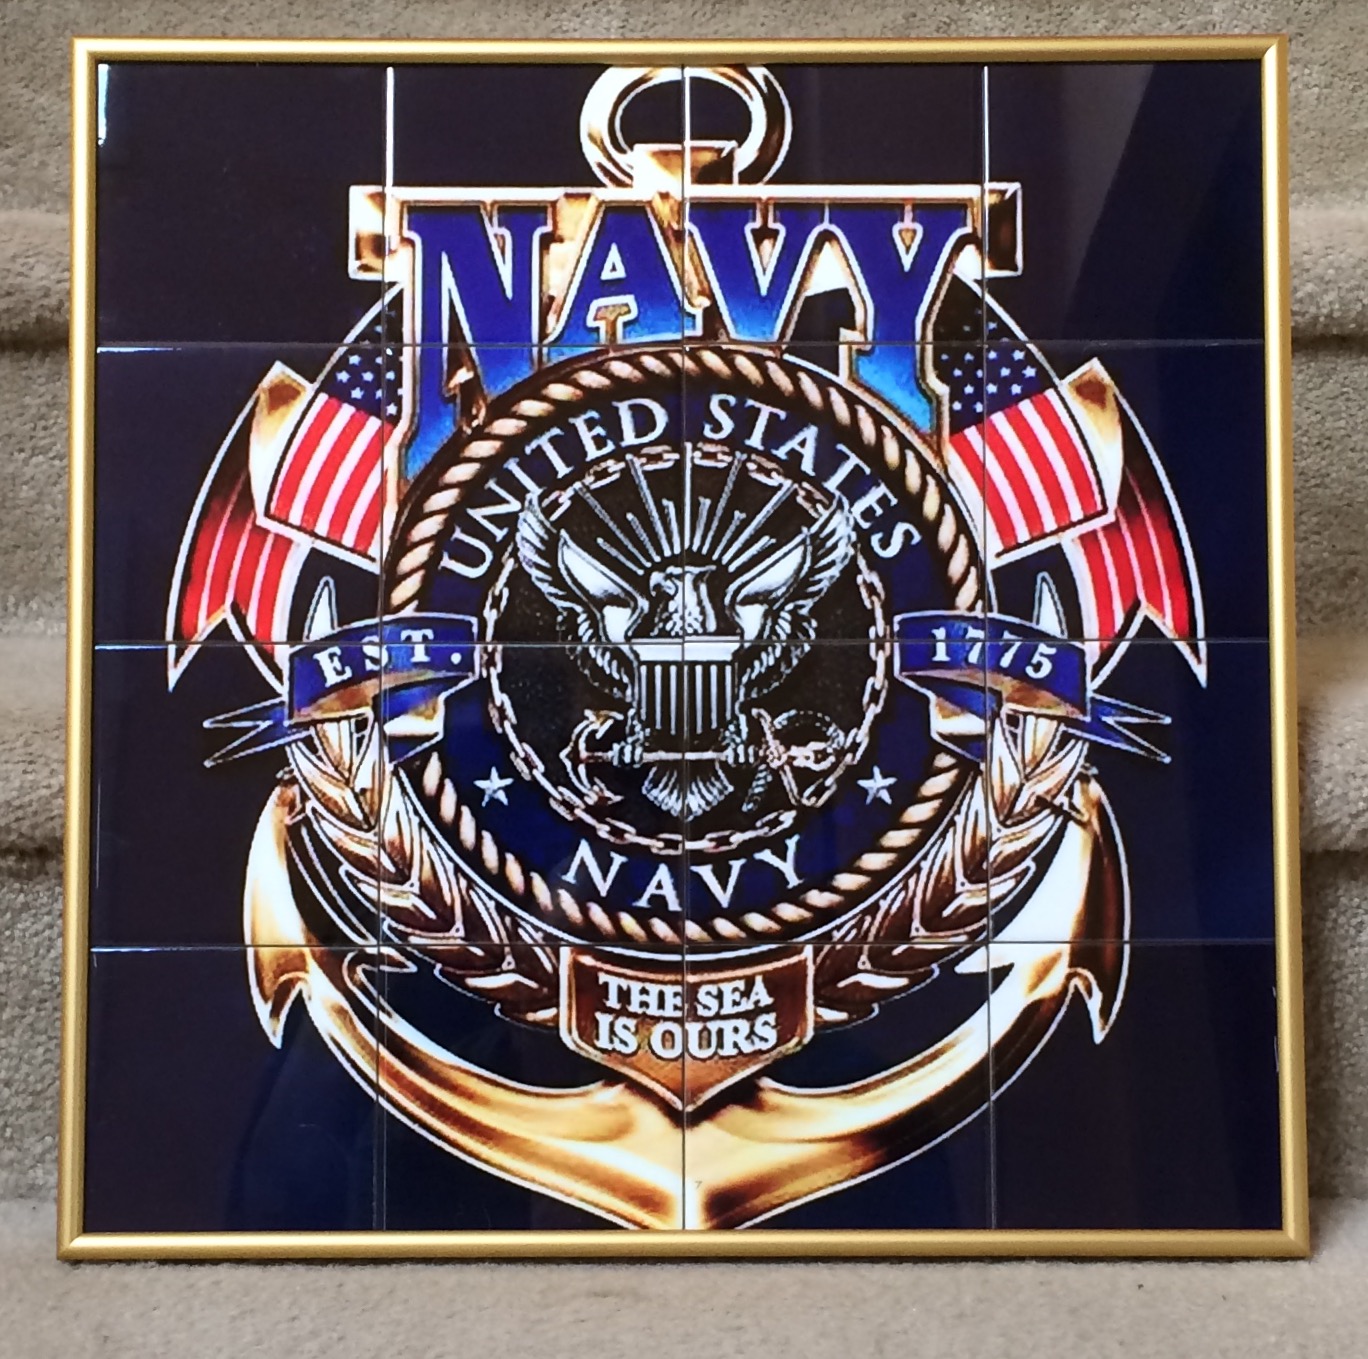 U.S. NAVY TILED MURAL made with sublimation printing